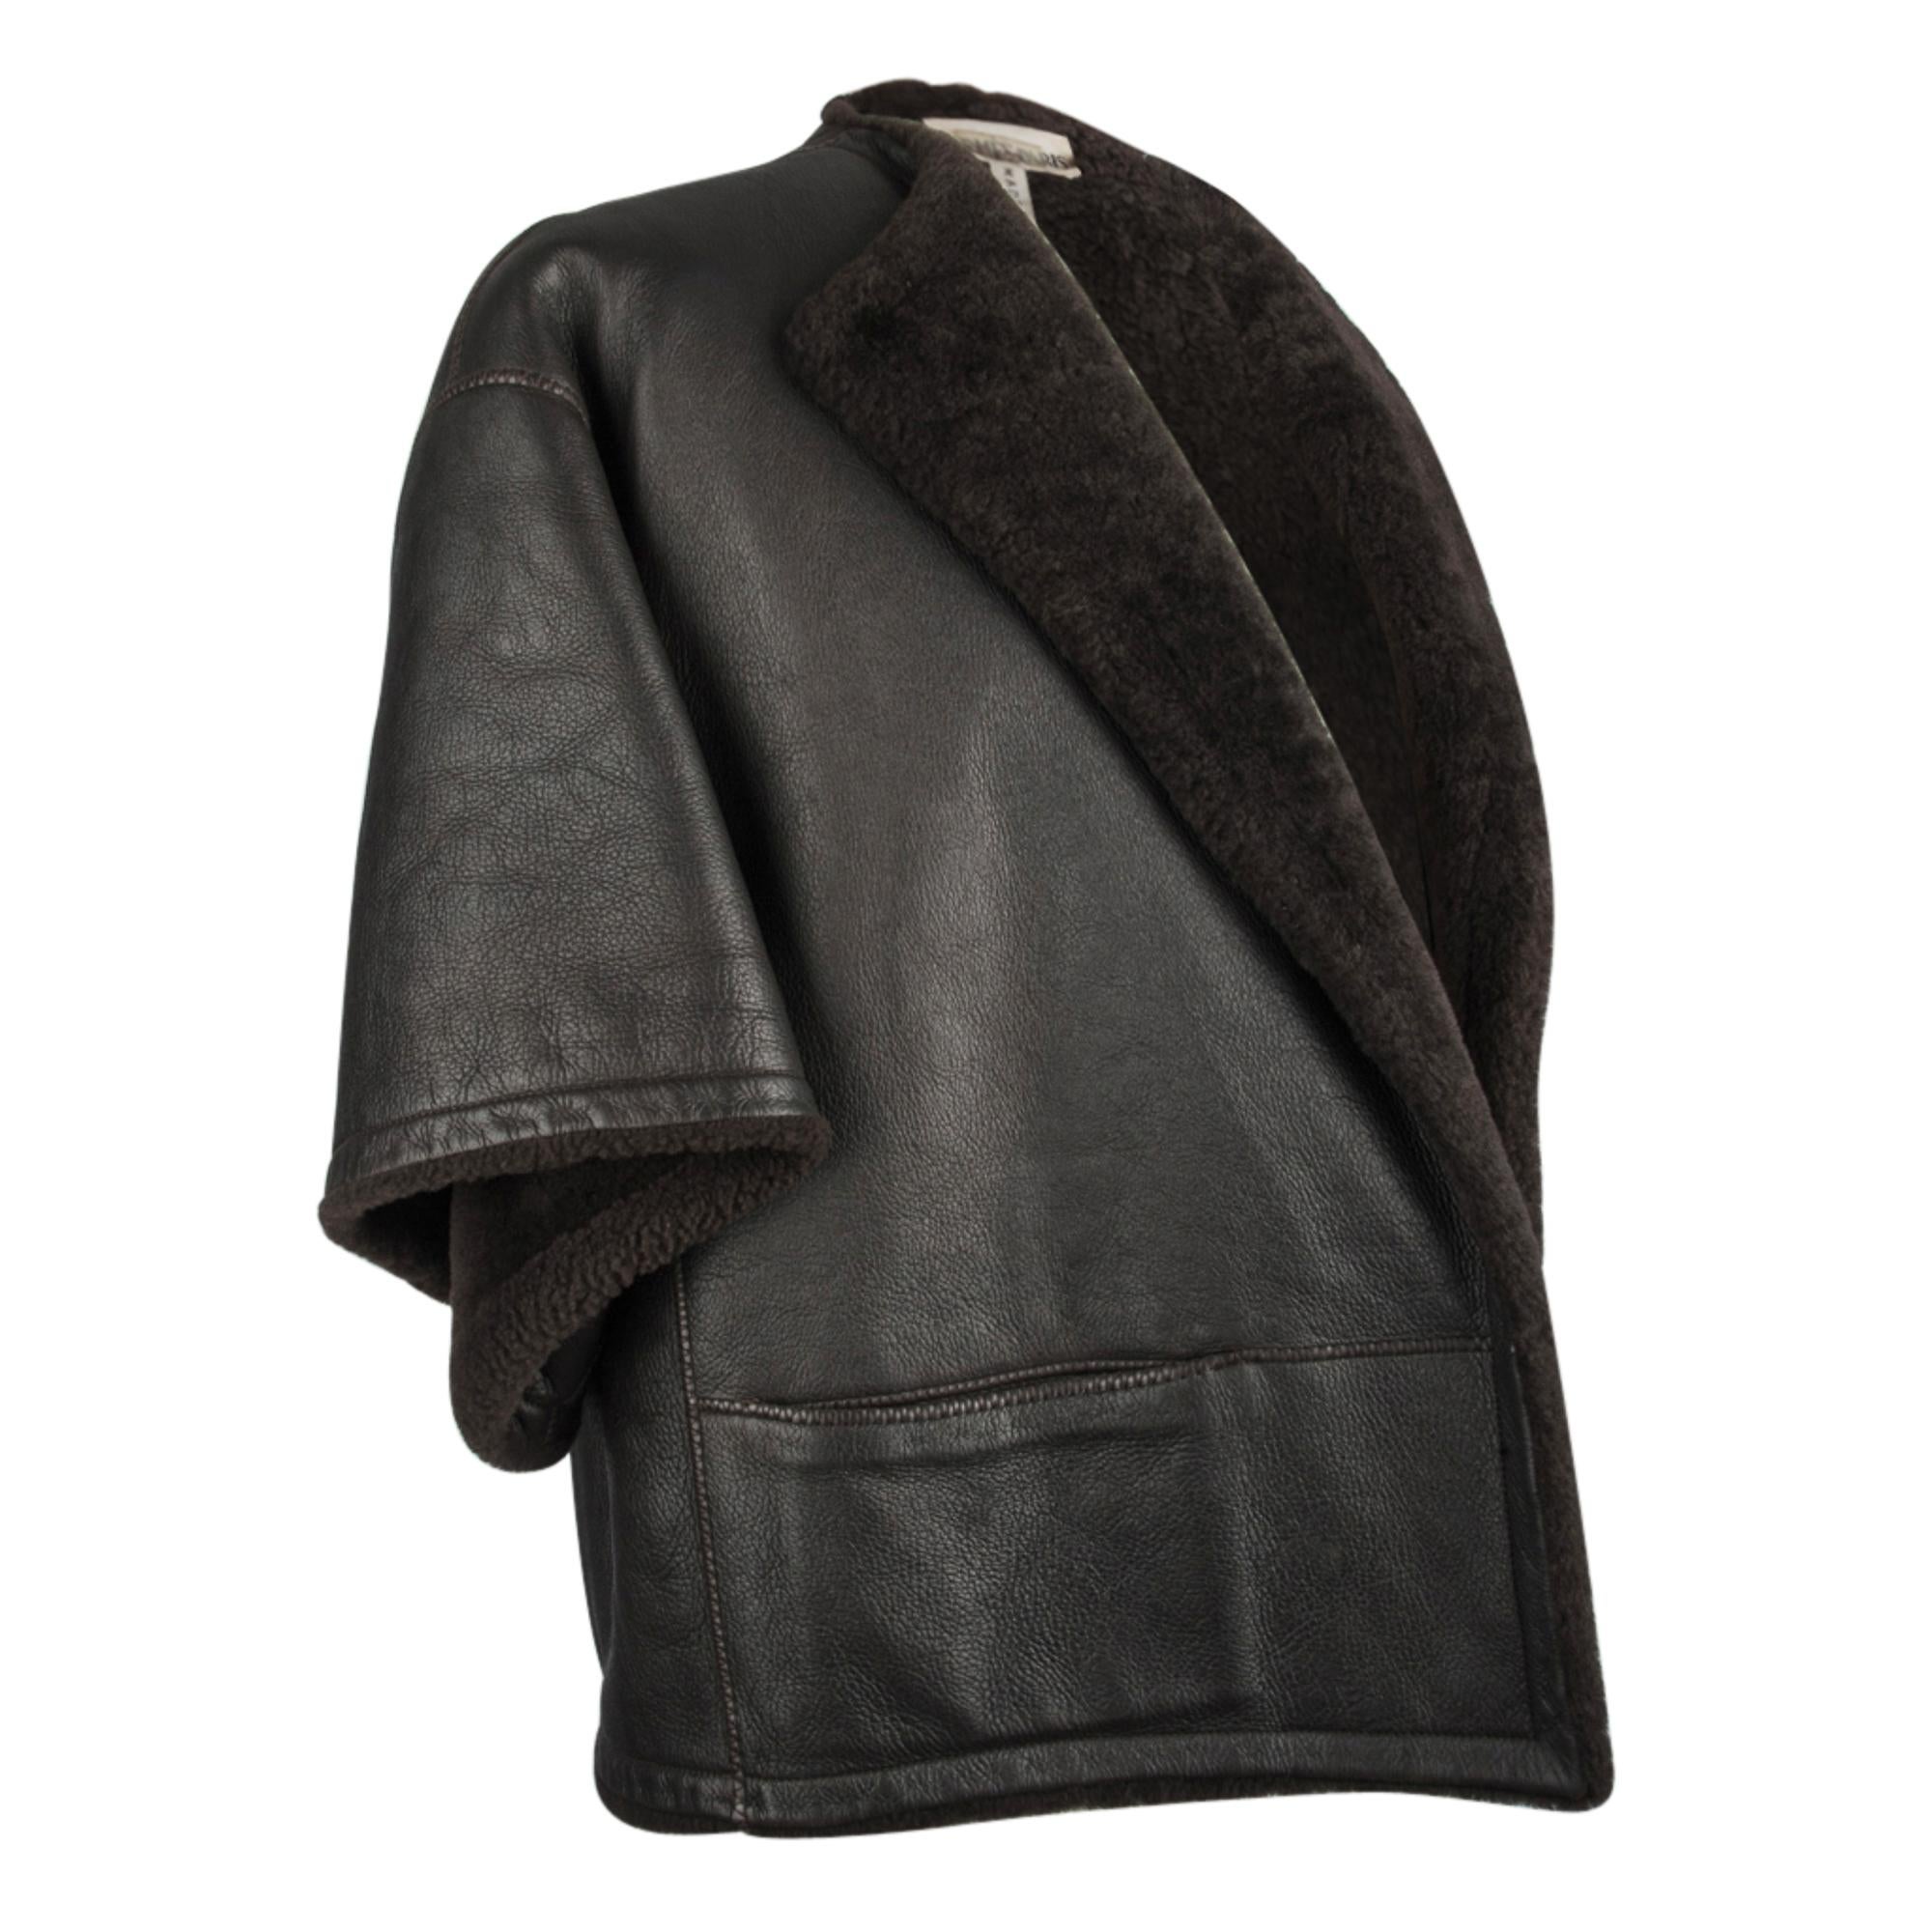 Mightychic offers an Hermes rich brown leather shearling capelet style jacket.  
Dark brown shearling jacket drop shoulder and 3/4 length wide sleeve.
2 front slash pockets.
Open - no closure. 
So chic.
Mightychic has excelled in customer service